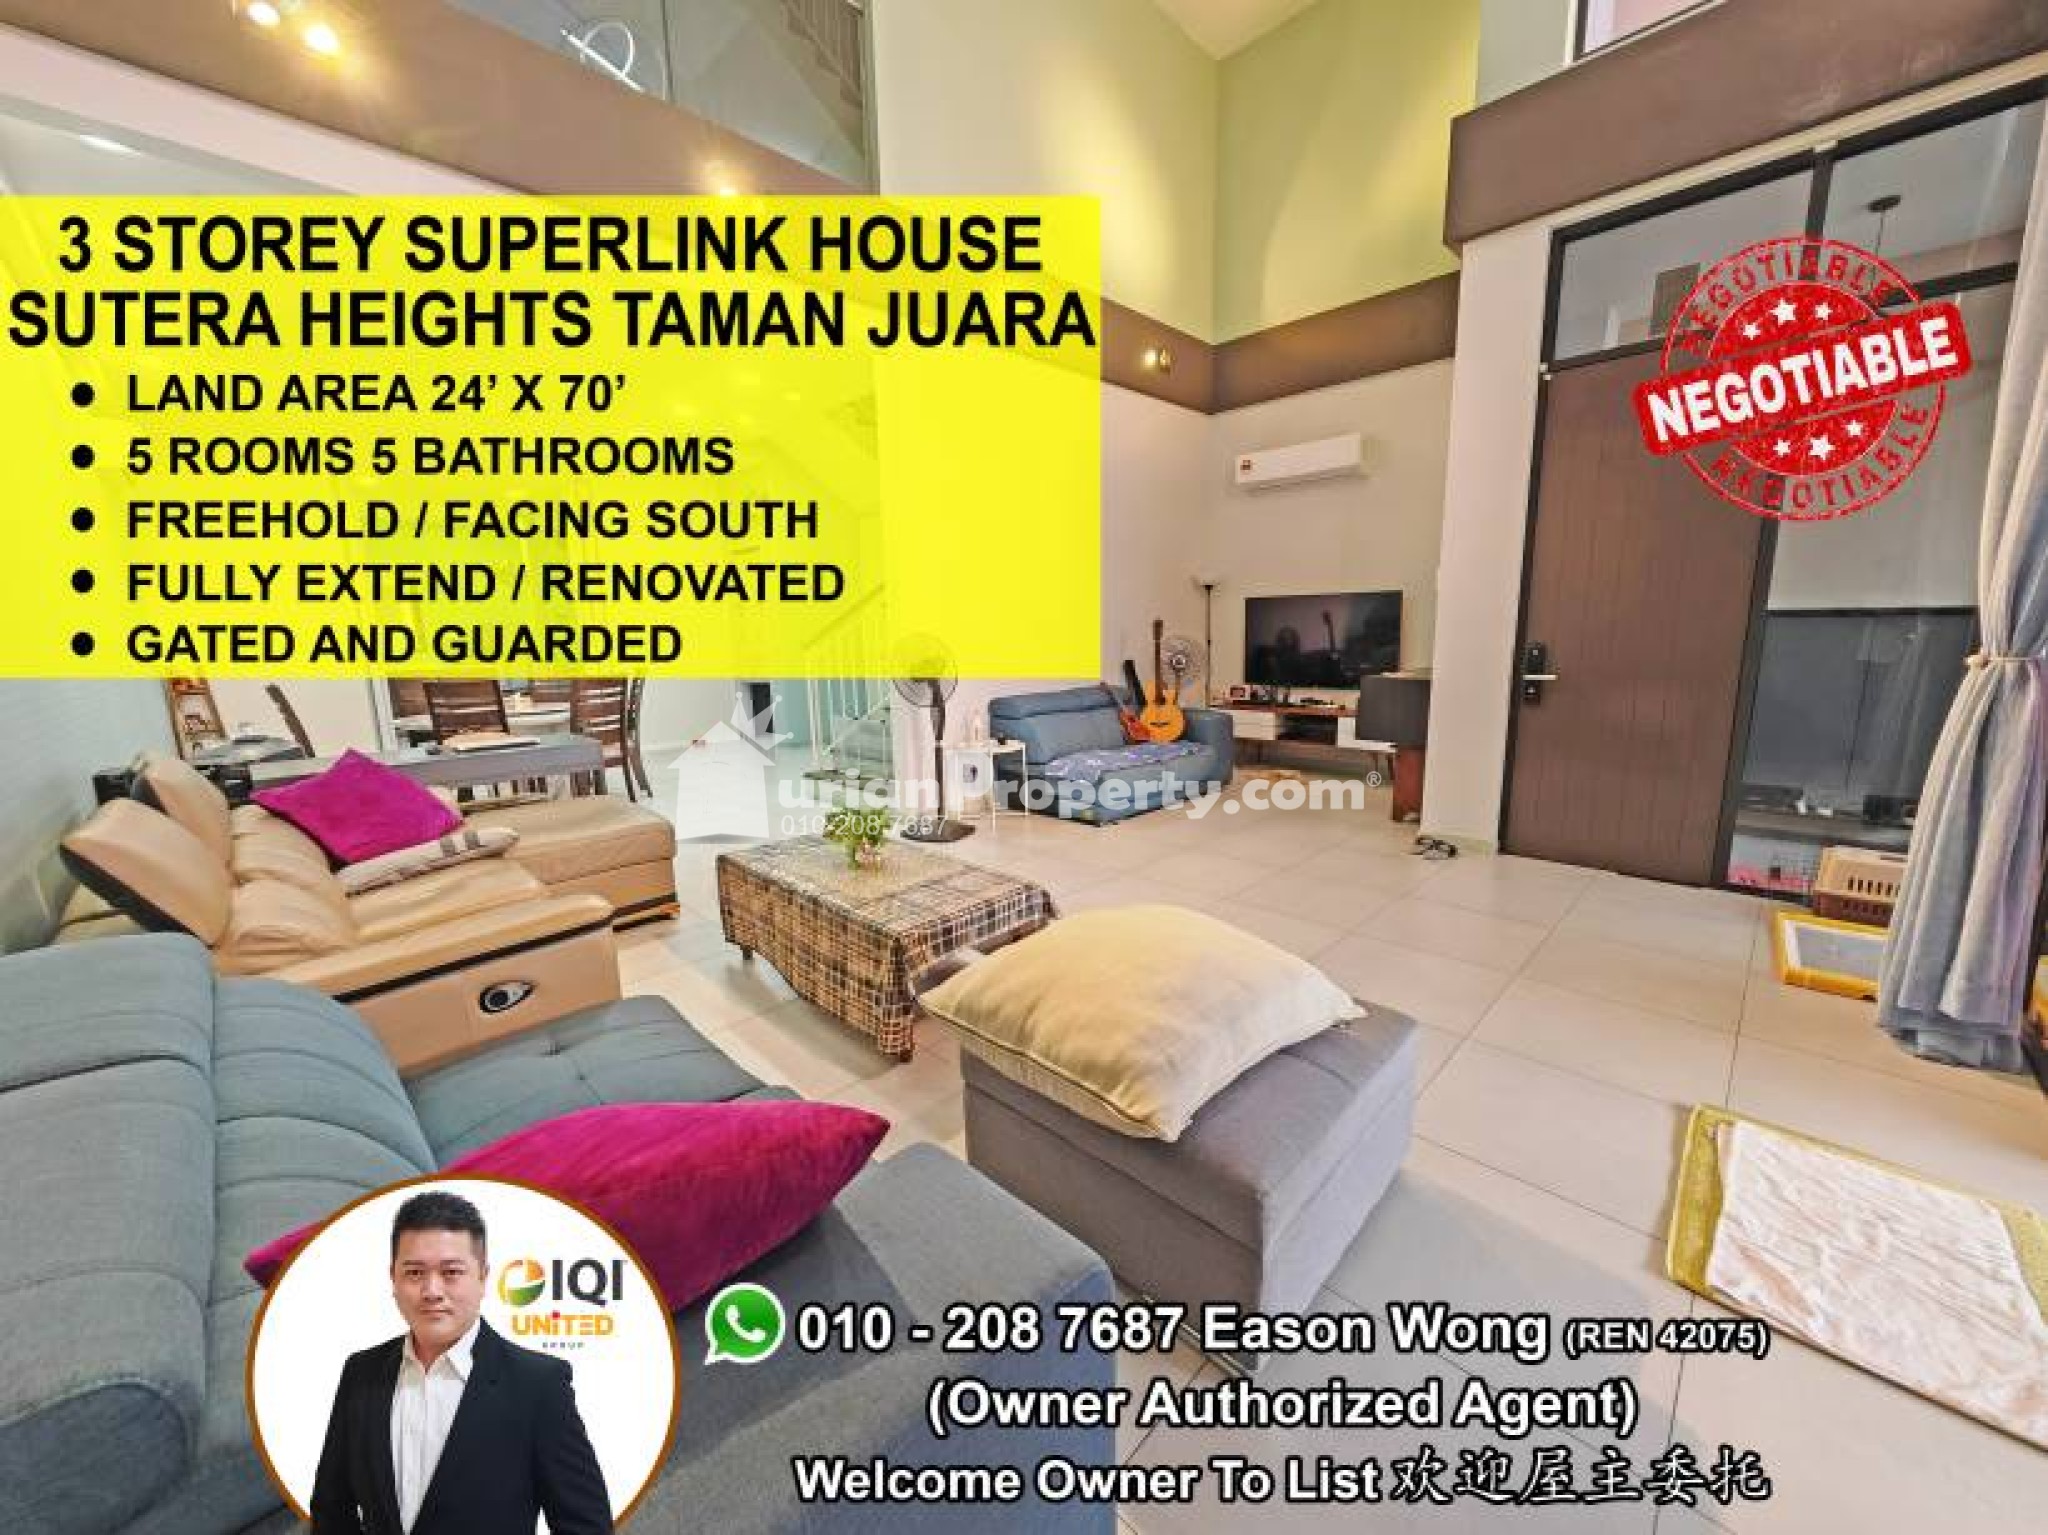 Terrace House For Sale at Sutera Heights